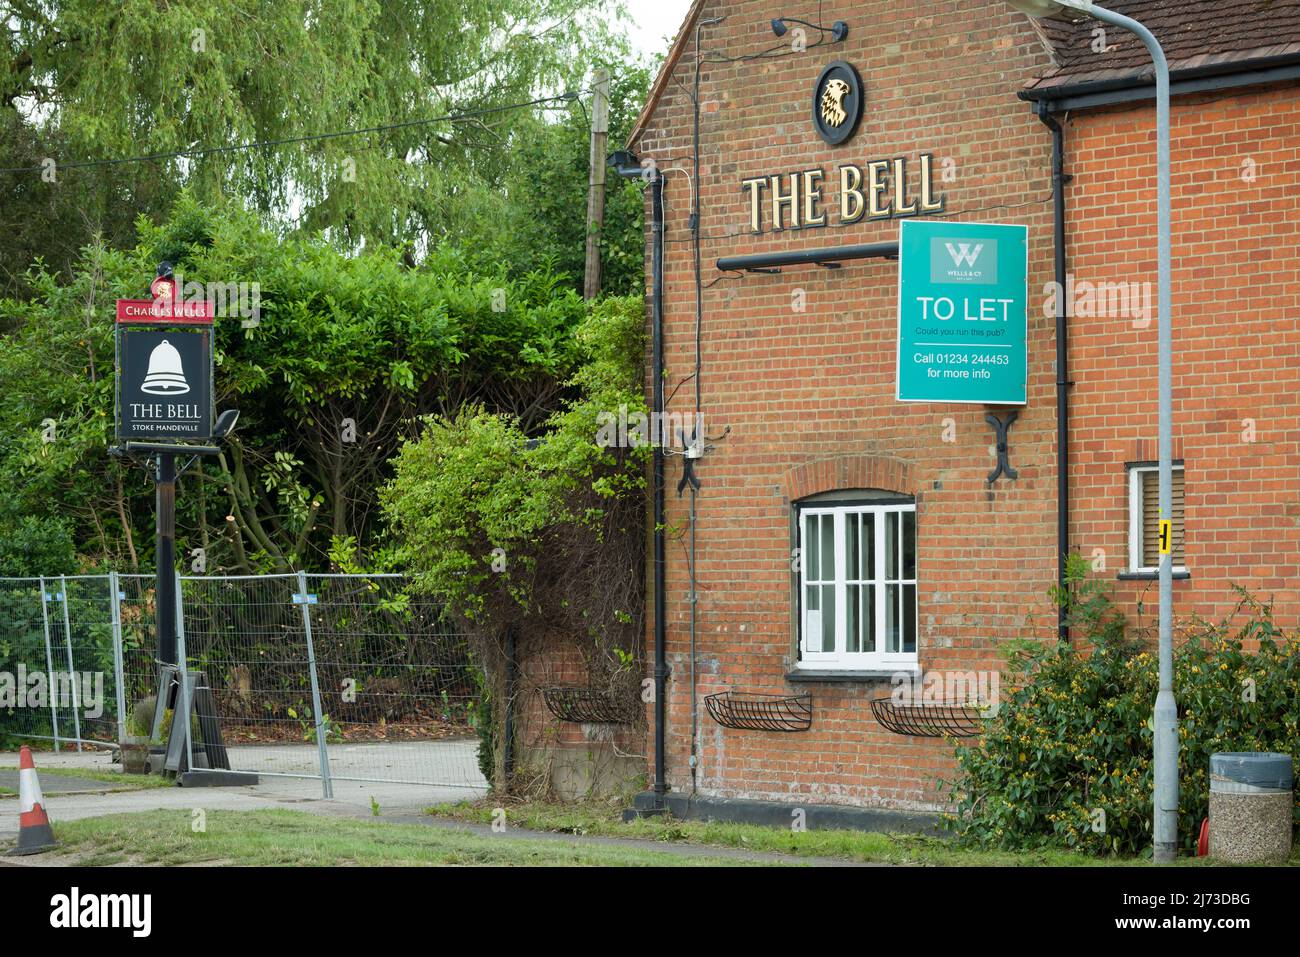 AYLESBURY, UK - July 09, 2021. Exterior of a closed British pub with a to let sign, for rent. Closed down or bankrupt business concept Stock Photo